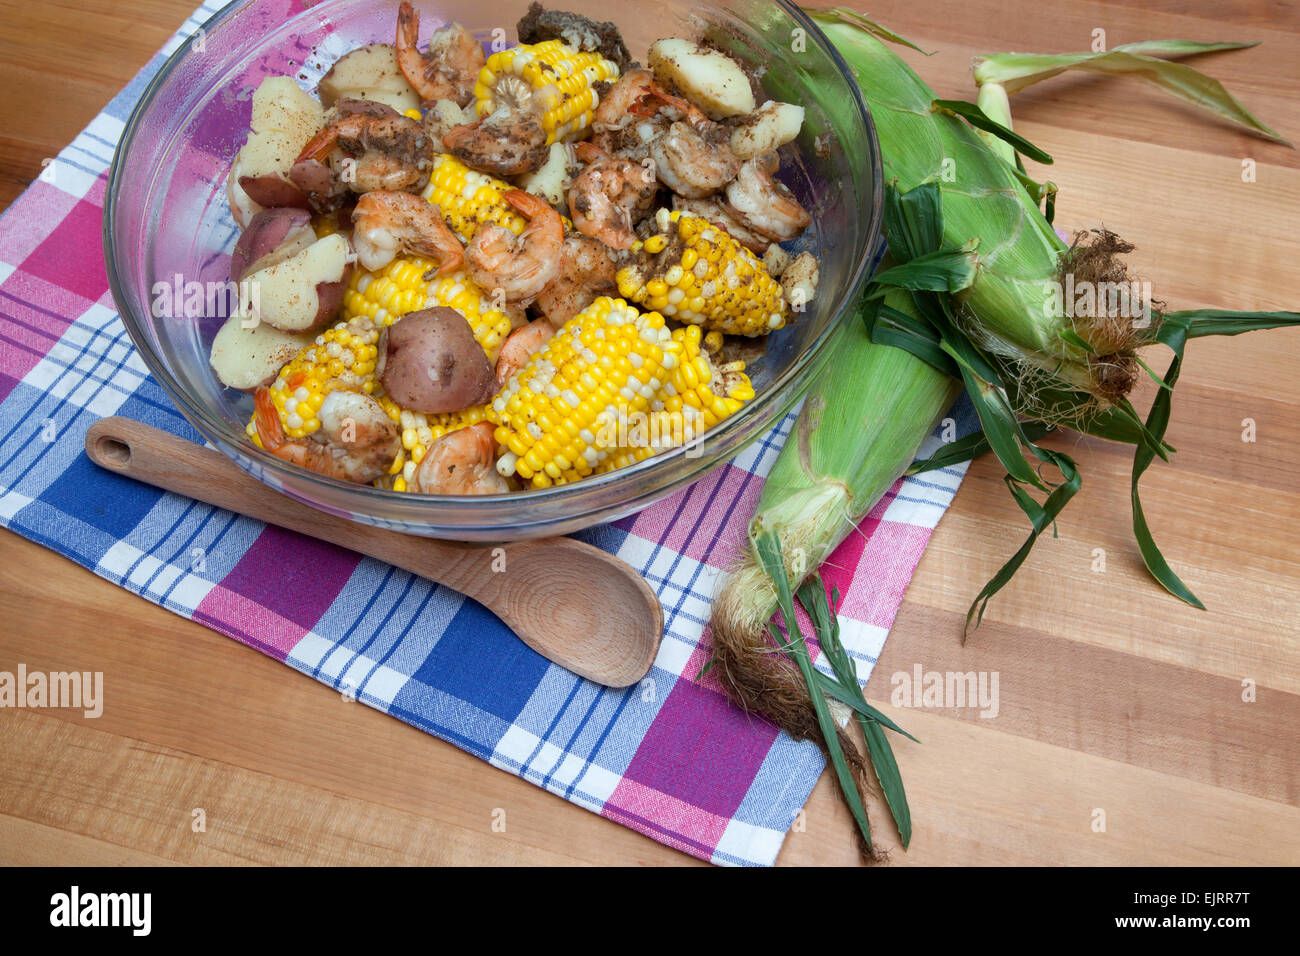 A glass bowl is filled with corn on the cob, red potatoes, and shrimp - a classic shrimp boil. Stock Photo